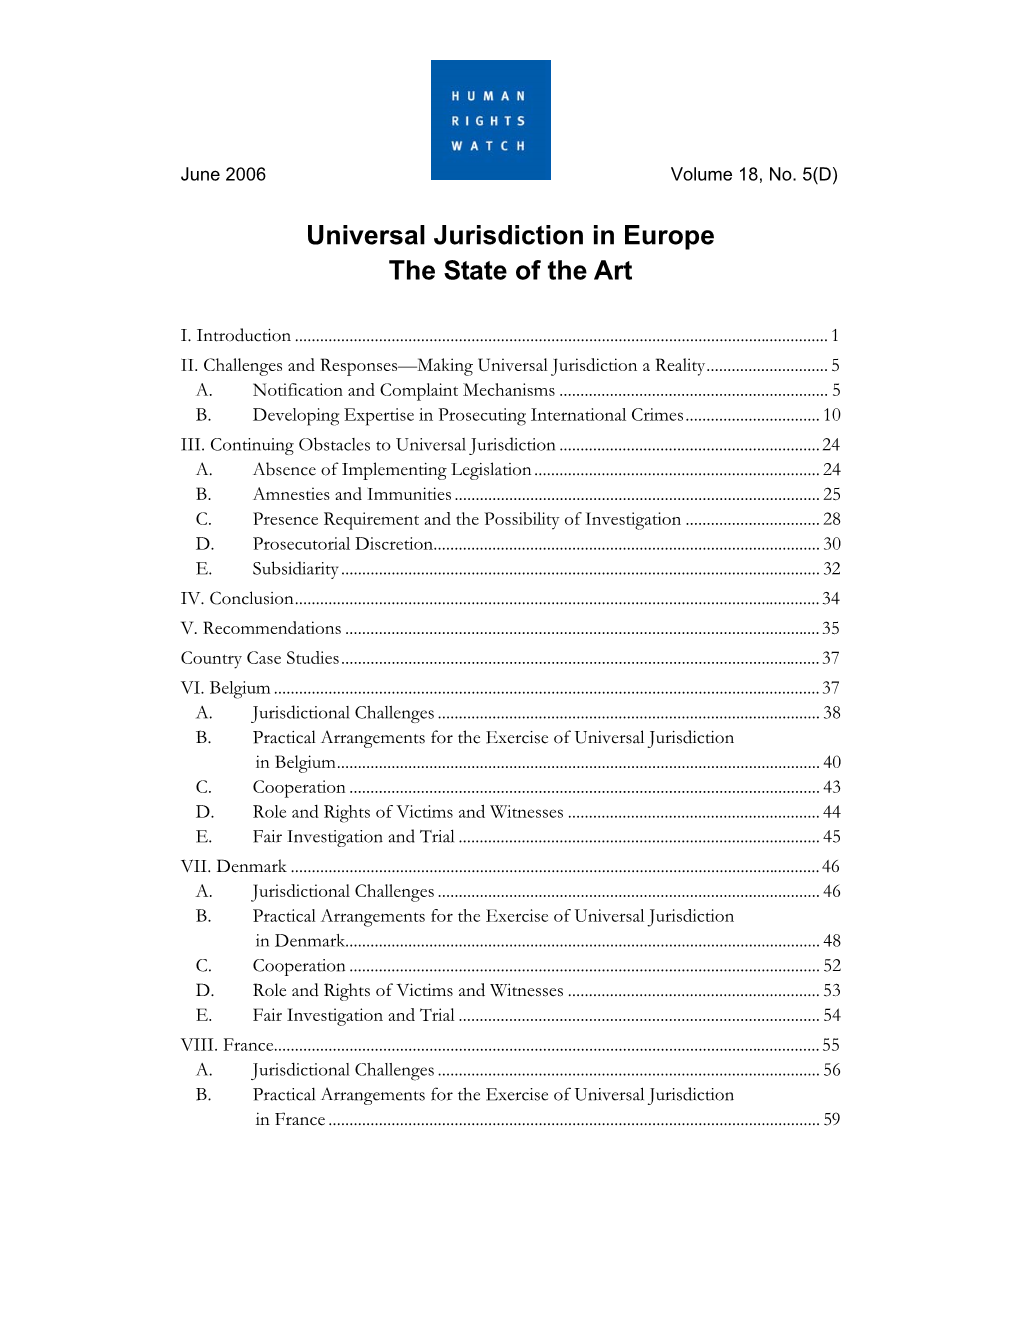 Universal Jurisdiction in Europe the State of the Art